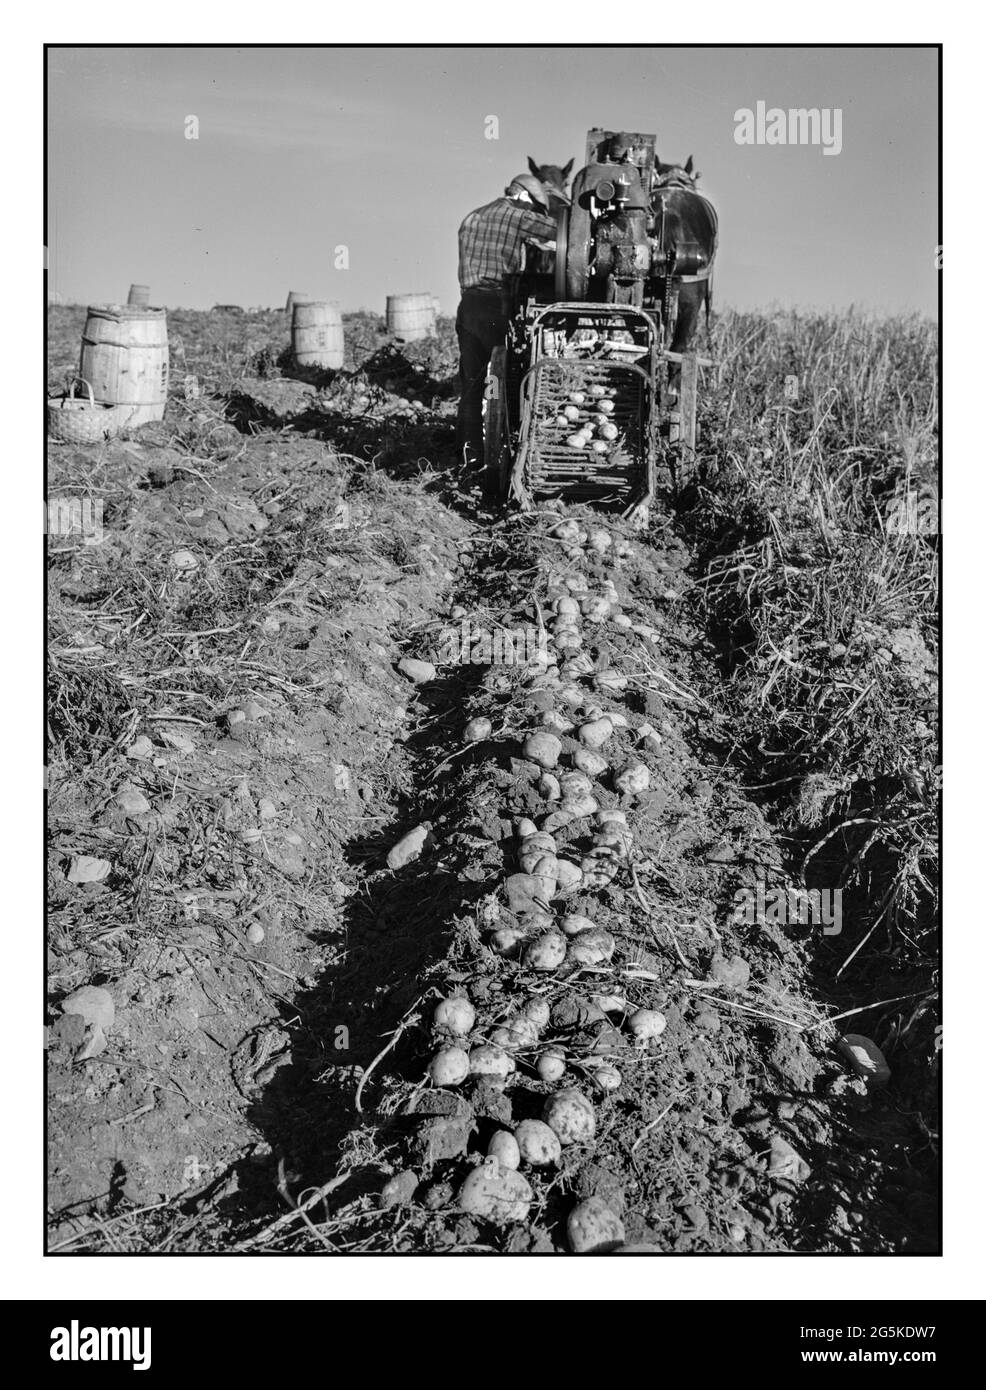 WW2 Food Production Seed potatoes on the farm of Mr. Edison Houston, FSA (Farm Security Administration) client and participant on community service seed program. Perham, Maine Jack Delano photographer 1943 Oct.  United States--Maine--Aroostook County--Perham America USA Stock Photo